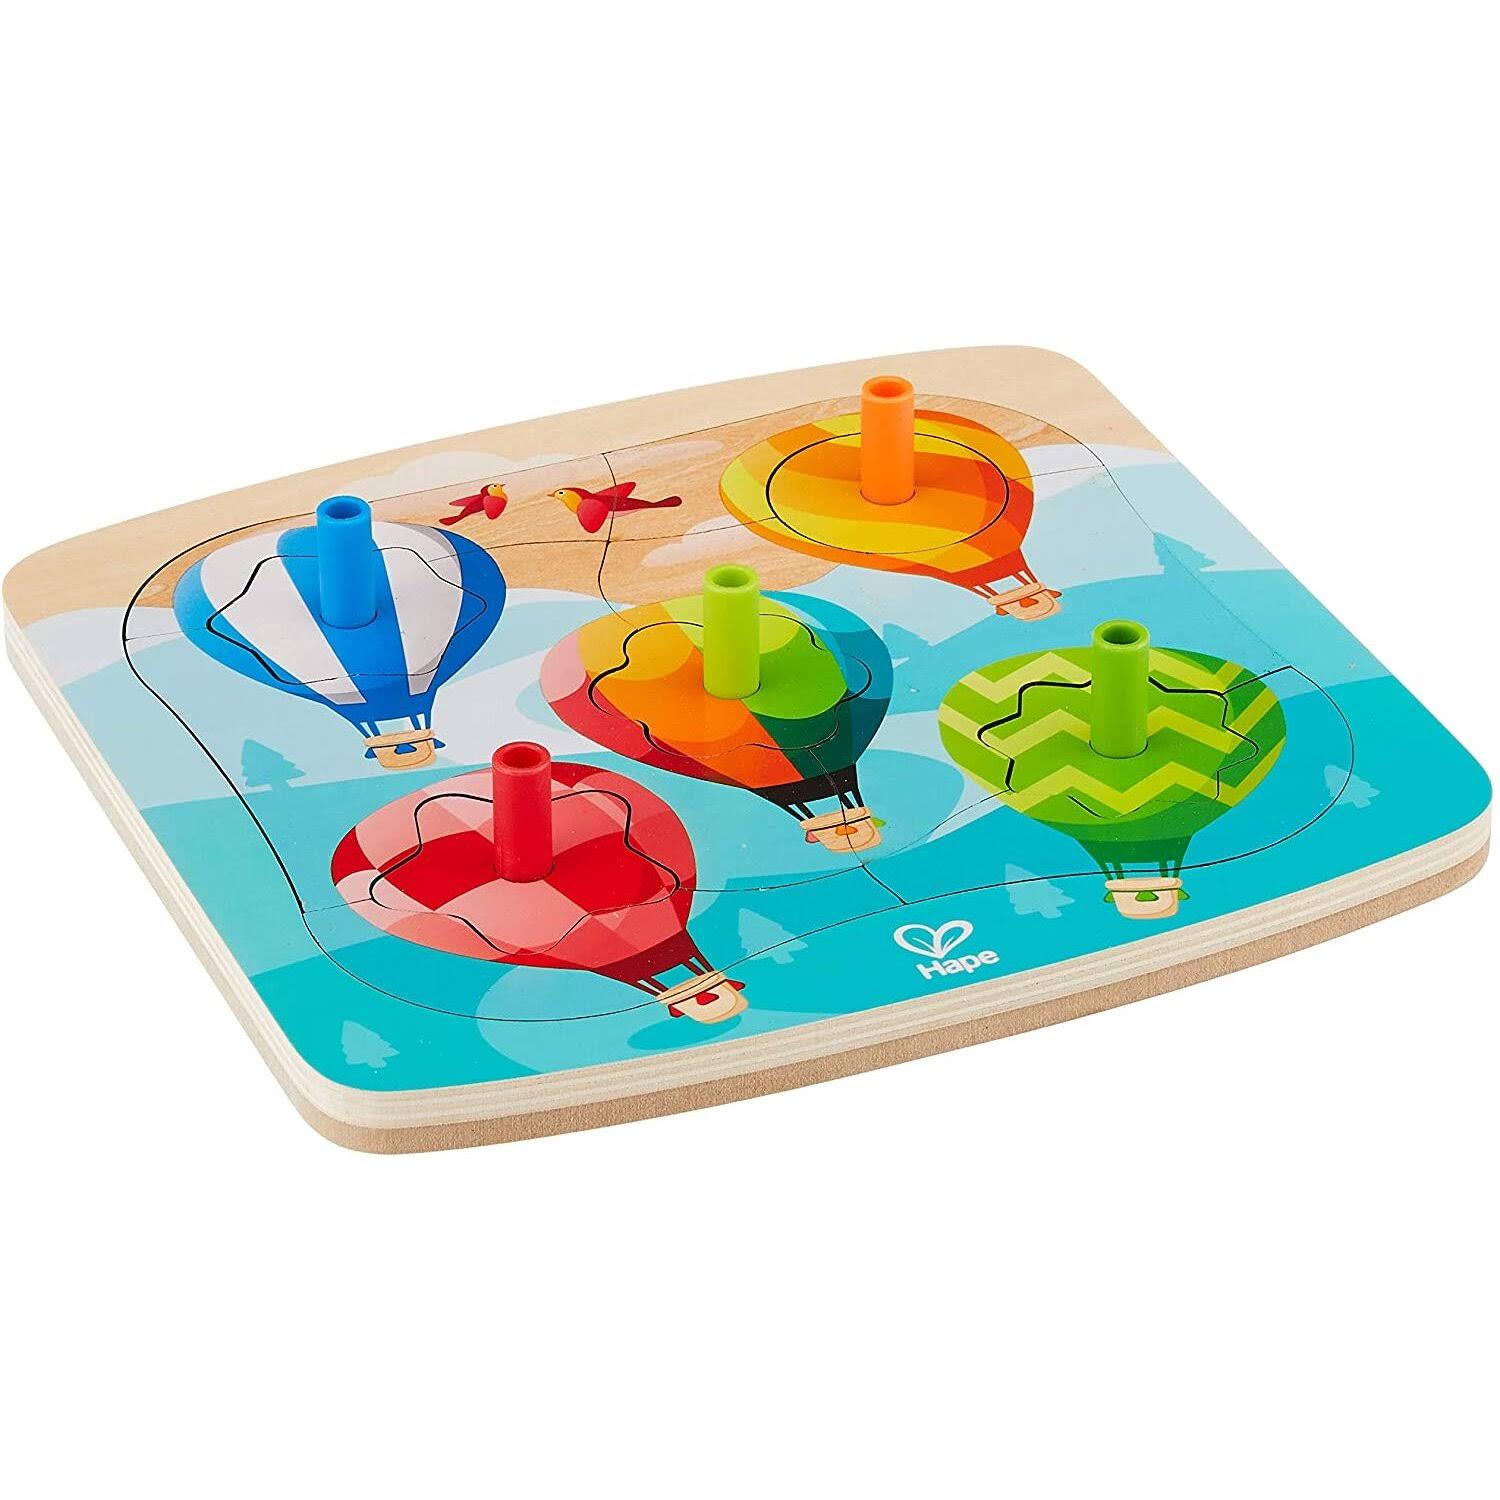 Hape Toys Spinning Balloons Puzzle Set